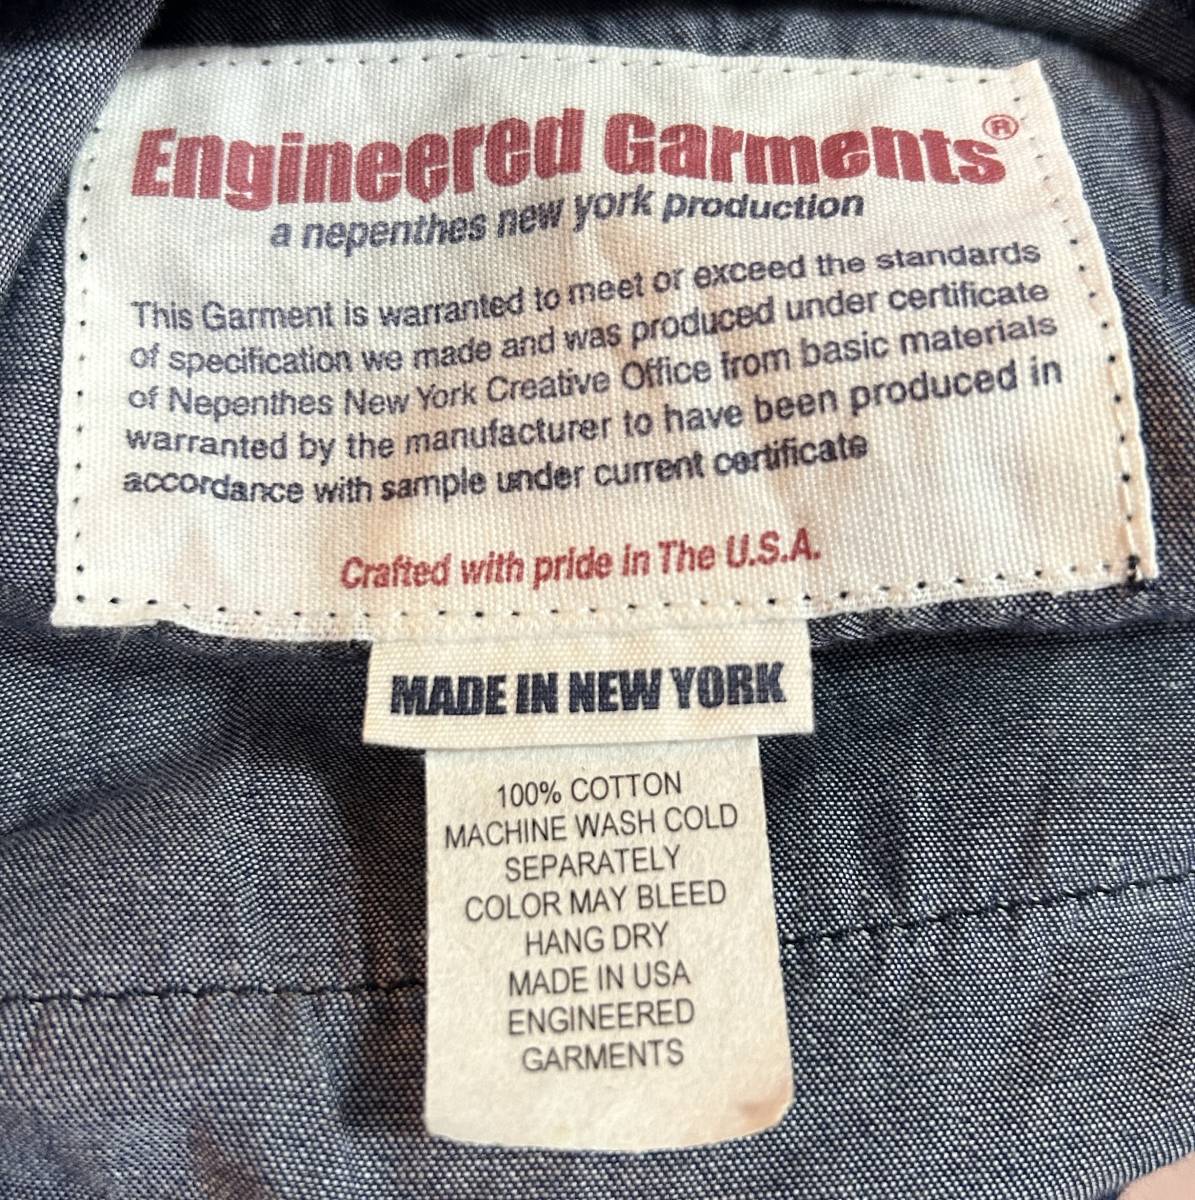 *FWK ENGINEERED GARMENTS Nepenthes indigo Work the best American made 1 BJBC.AA